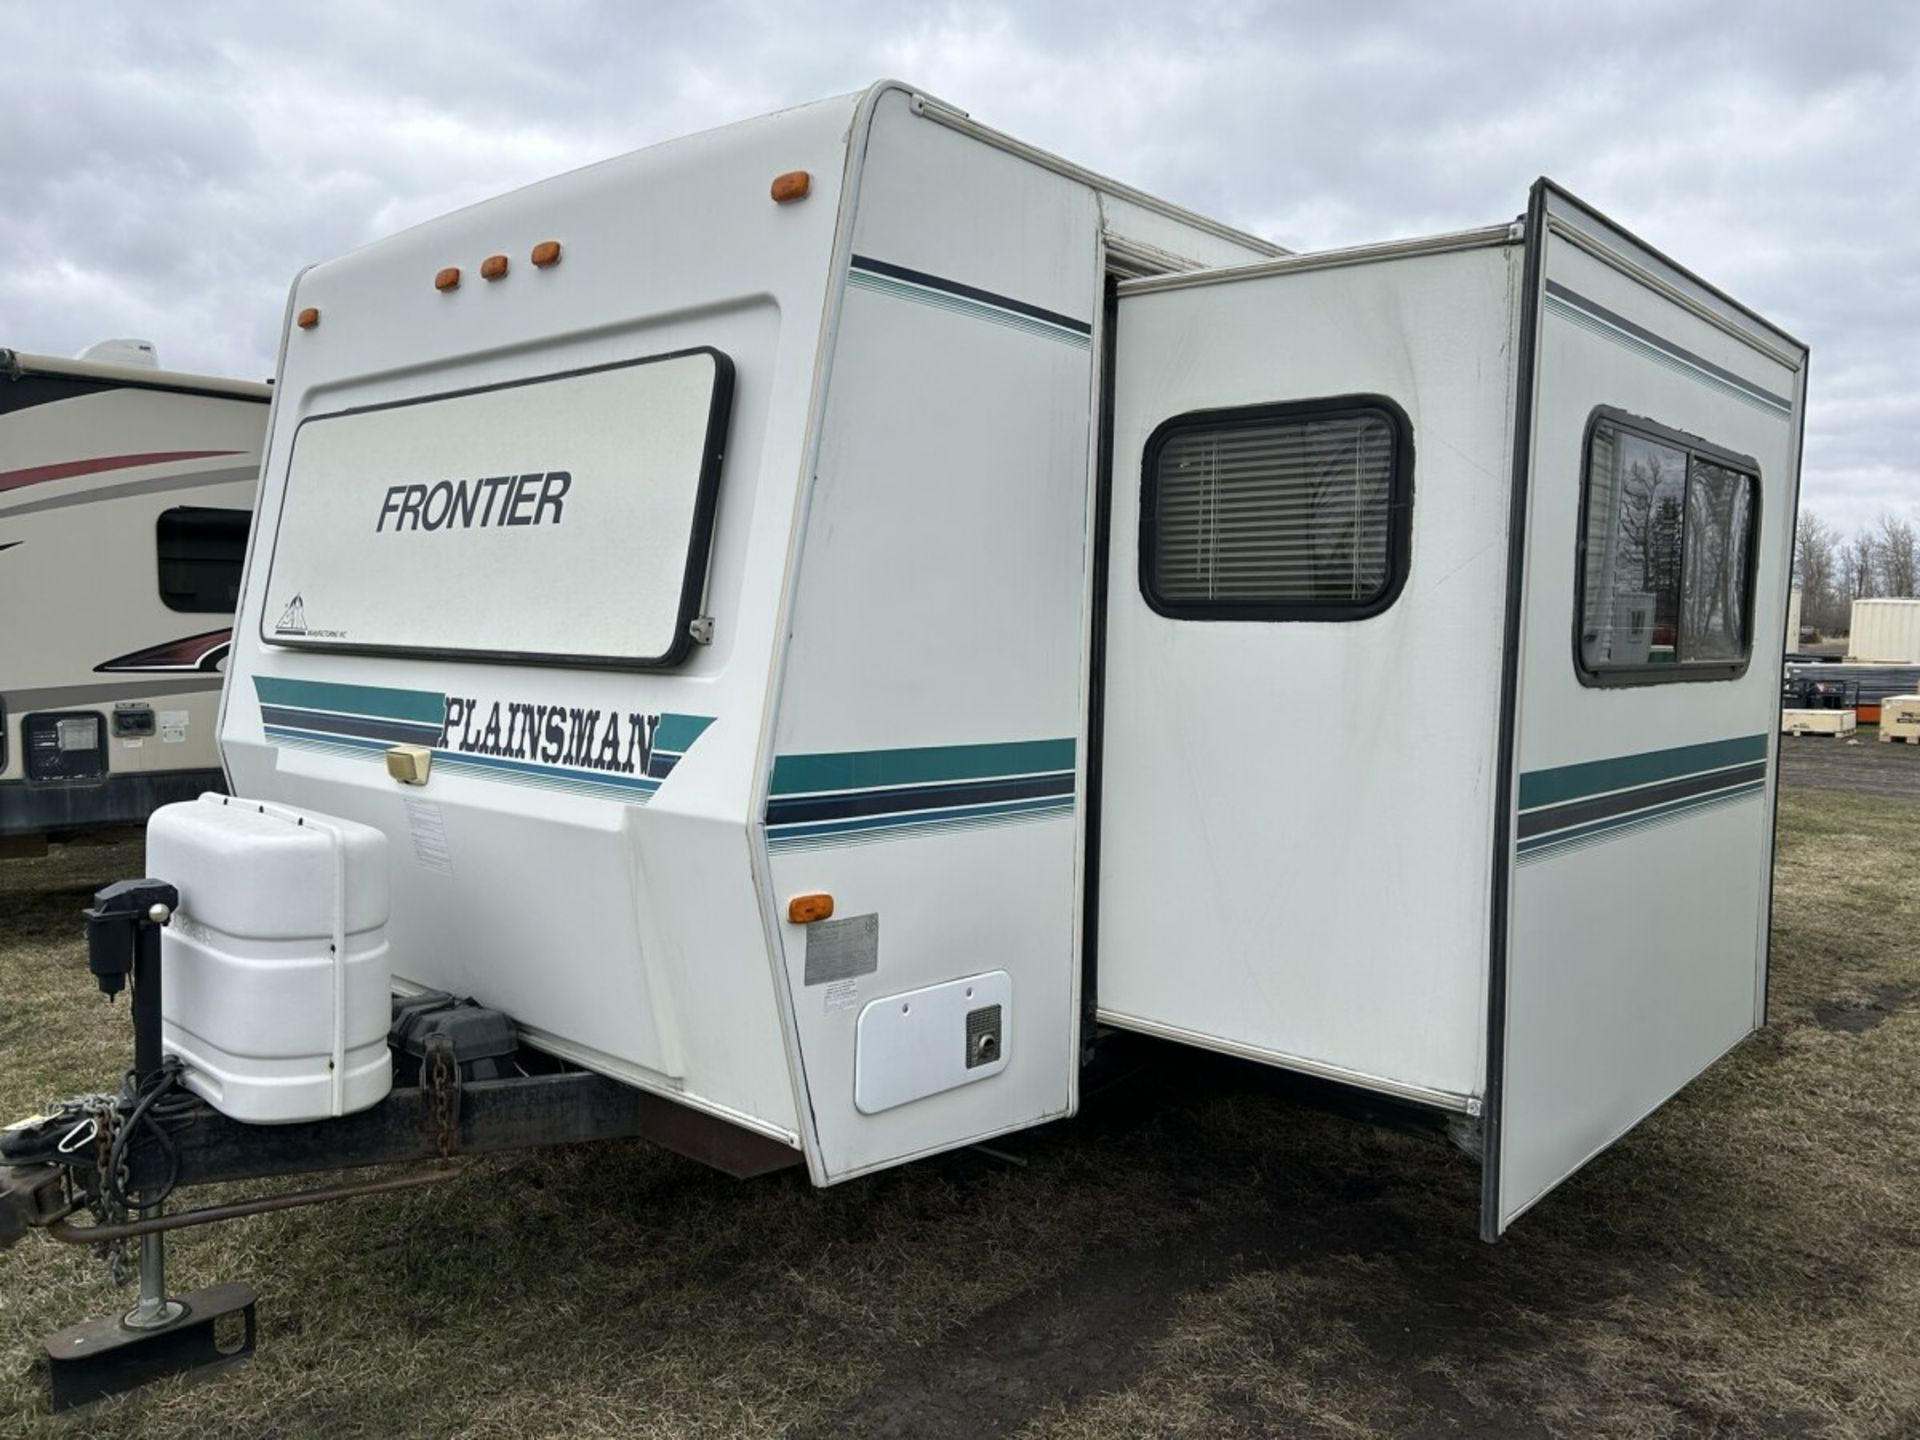 1999 FRONTIER PLAINSMAN T264SL 25 FT HOLIDAY TRAILER, SLIDE OUT, NOTE: CUSTOM STEP SOLD SEPERATELY - Image 16 of 17